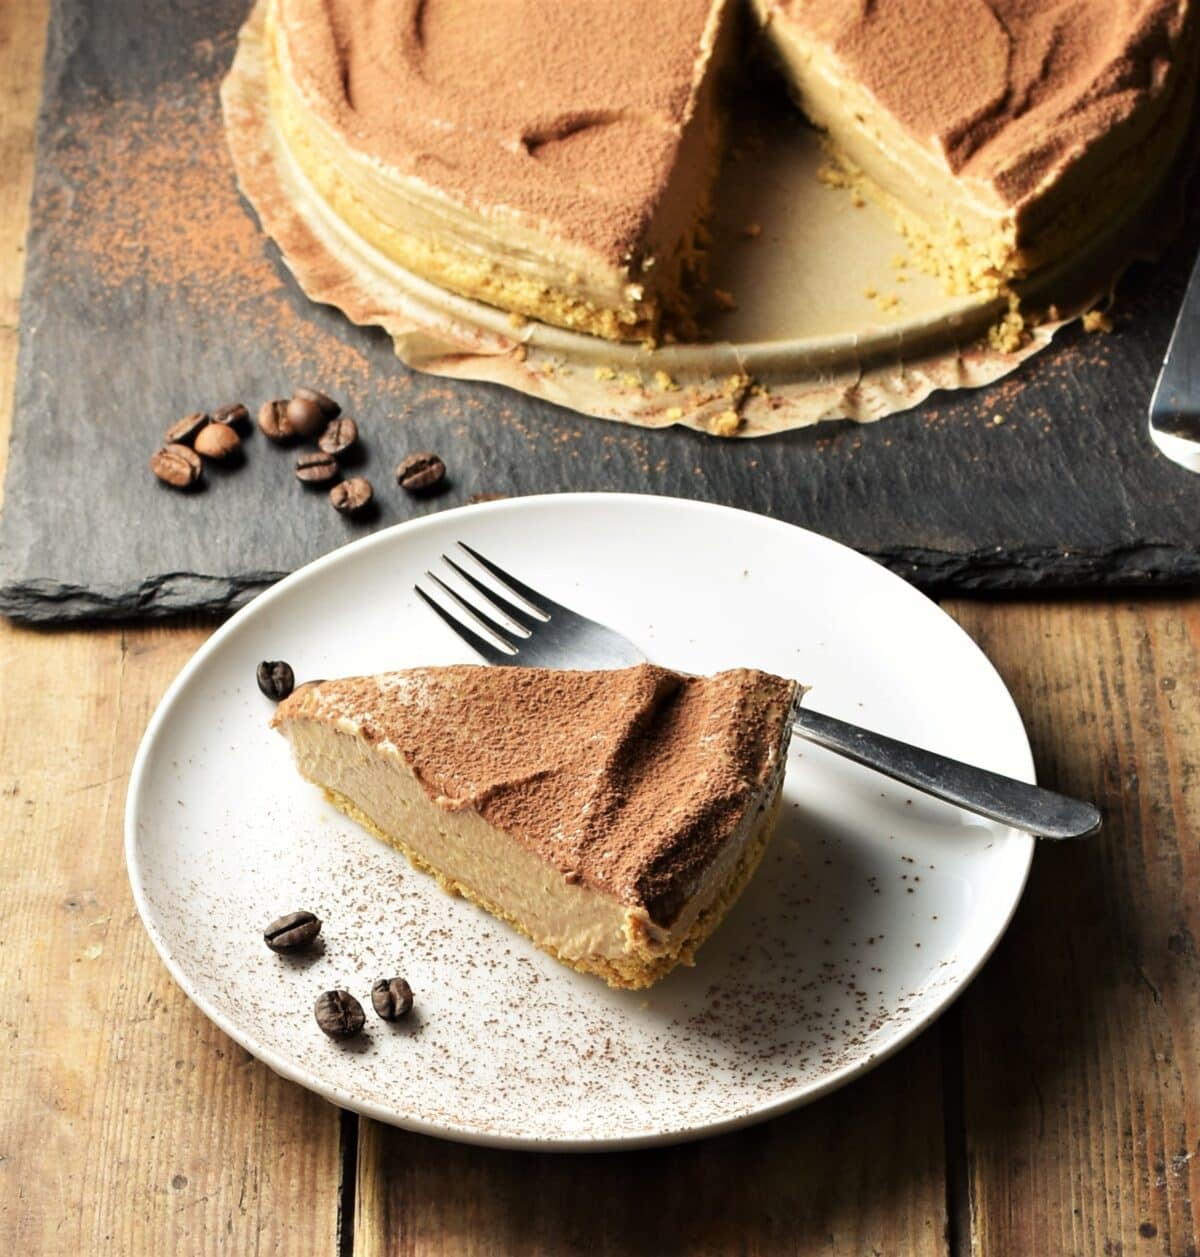 Slice of coffee cheesecake on white plate with coffee beans and fork, with cheesecake in background.